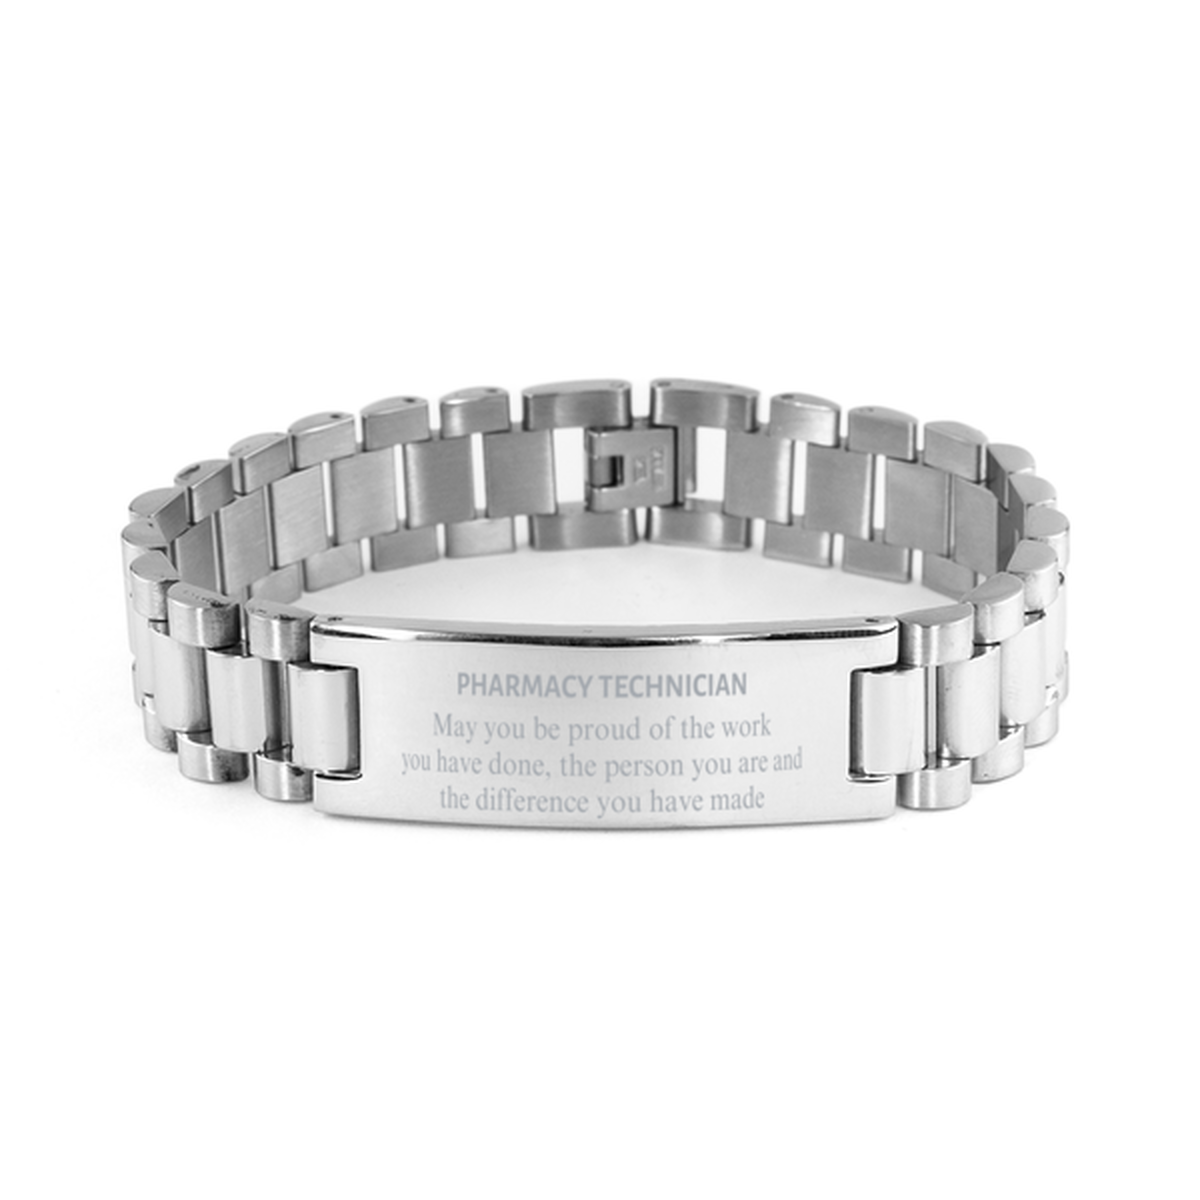 Pharmacy Technician May you be proud of the work you have done, Retirement Pharmacy Technician Ladder Stainless Steel Bracelet for Colleague Appreciation Gifts Amazing for Pharmacy Technician